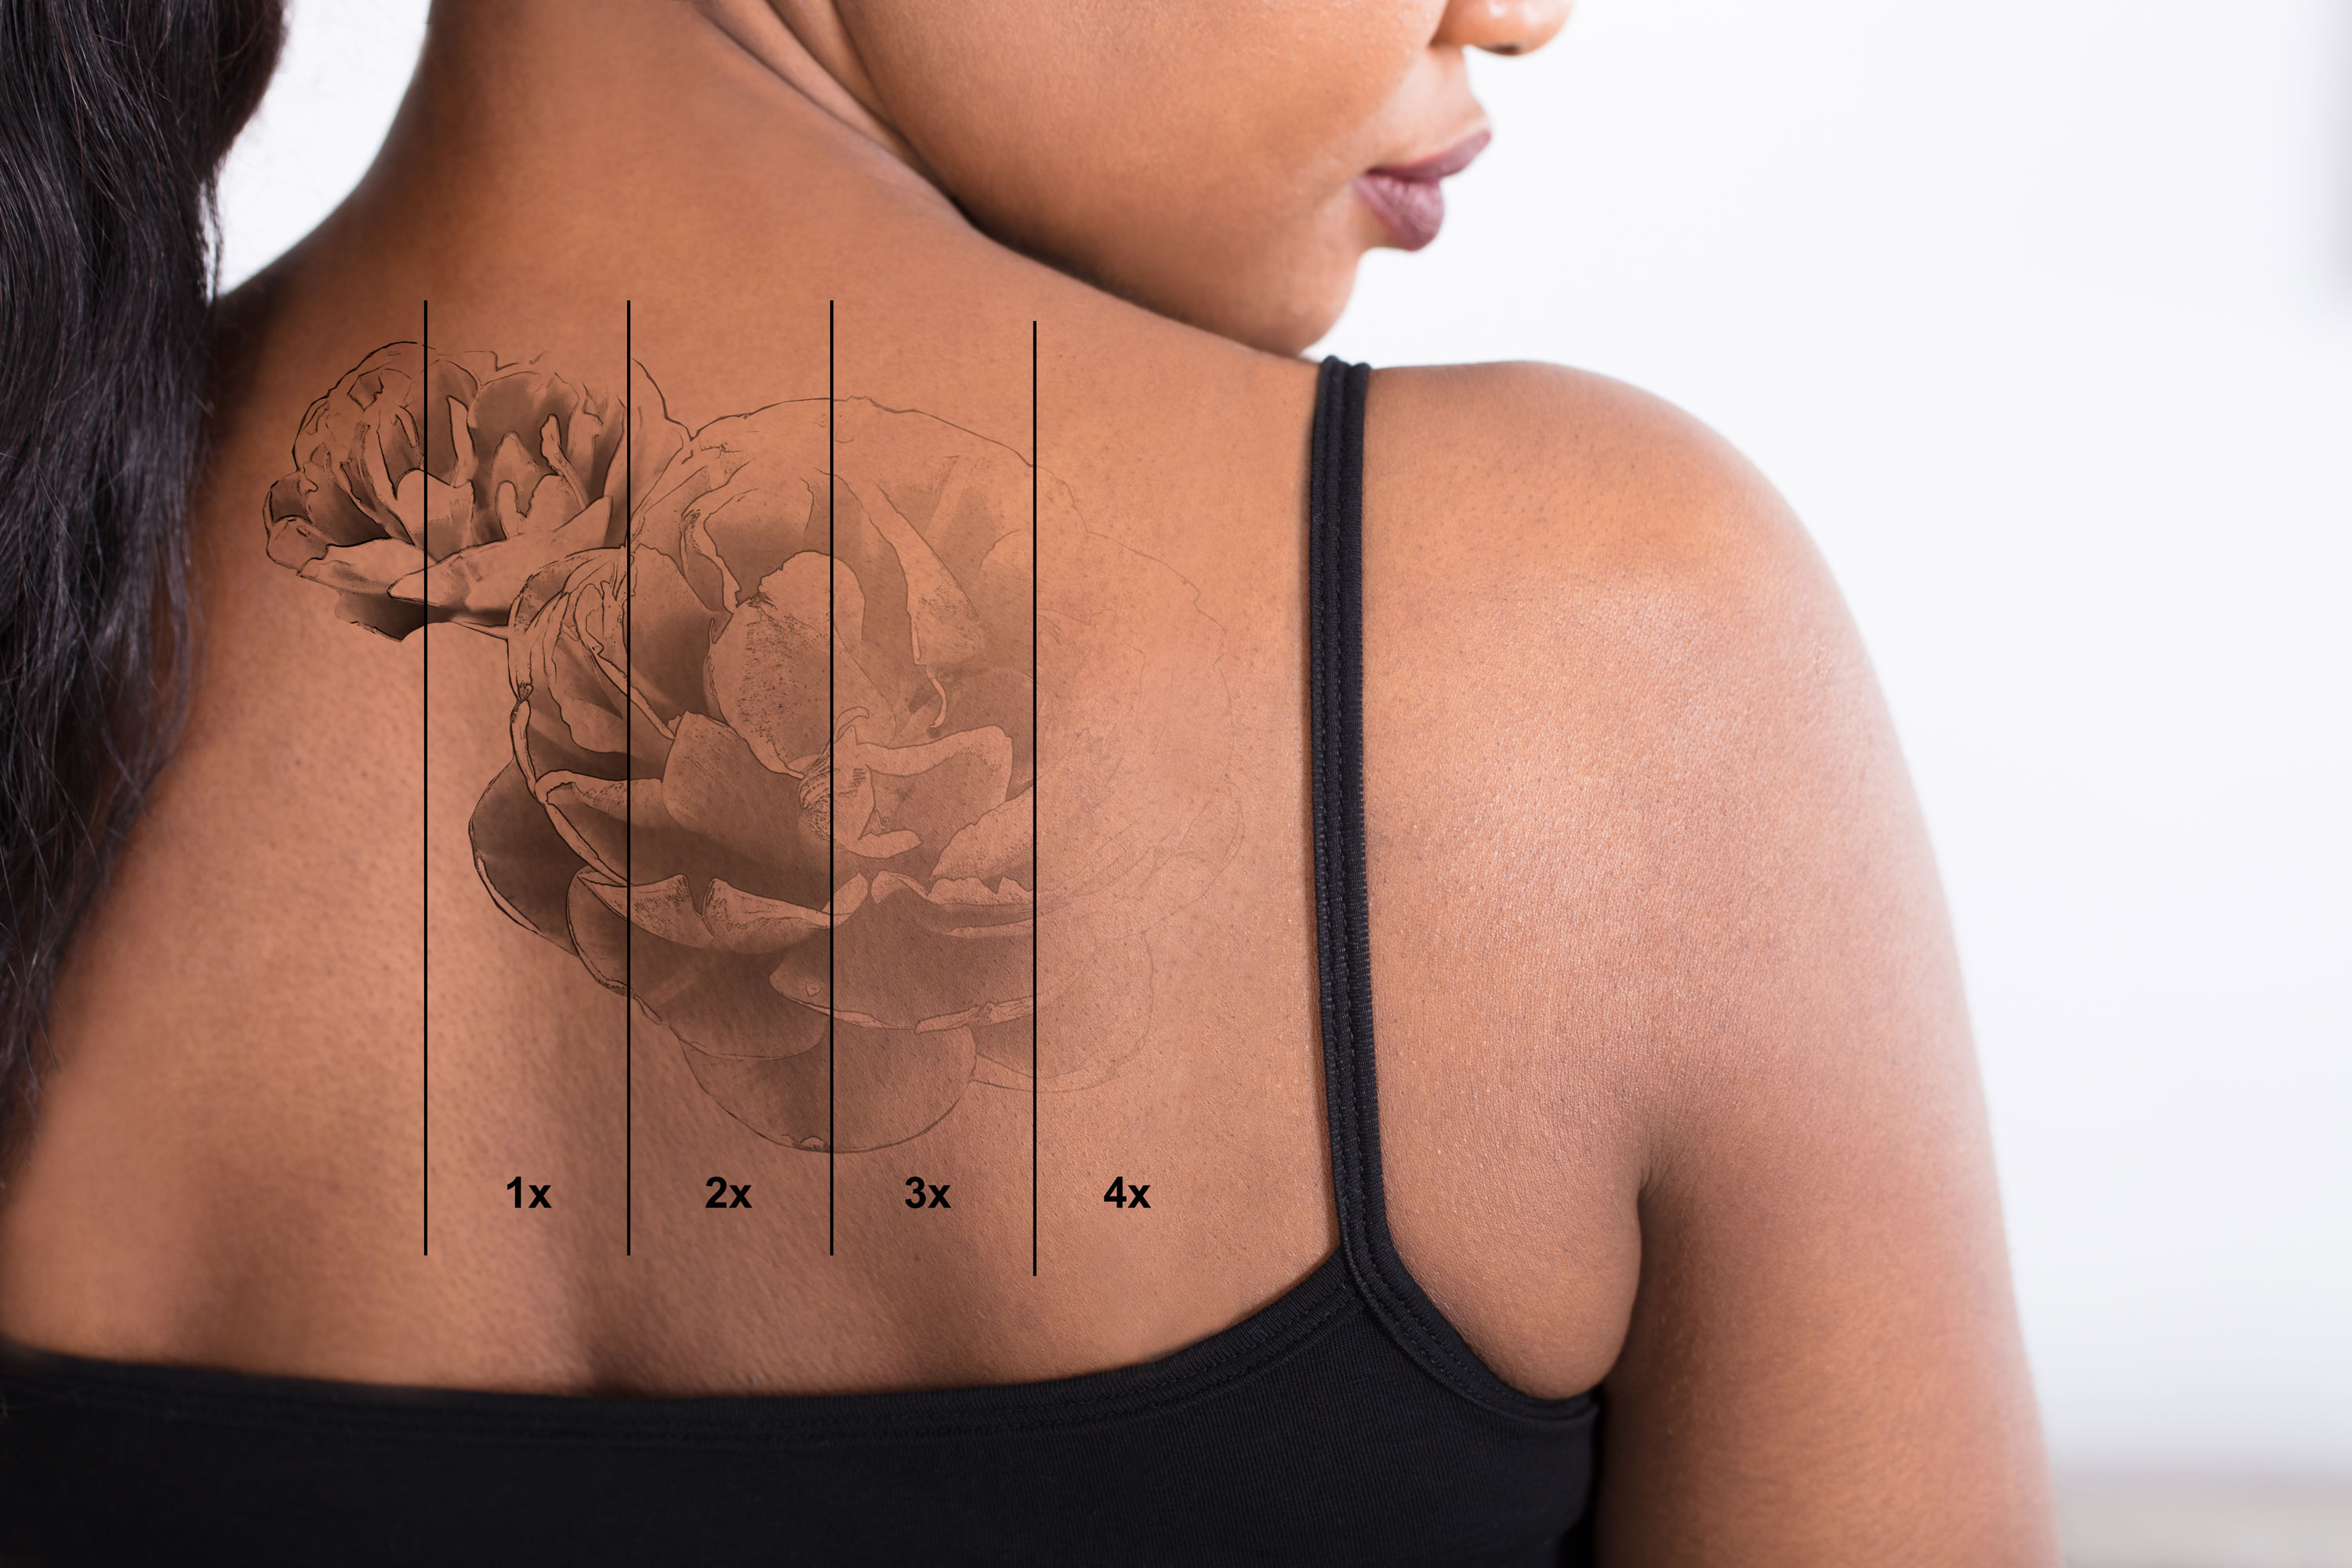 7 sessions of Tattoo Removal on Dark Skin : r/TattooRemoval